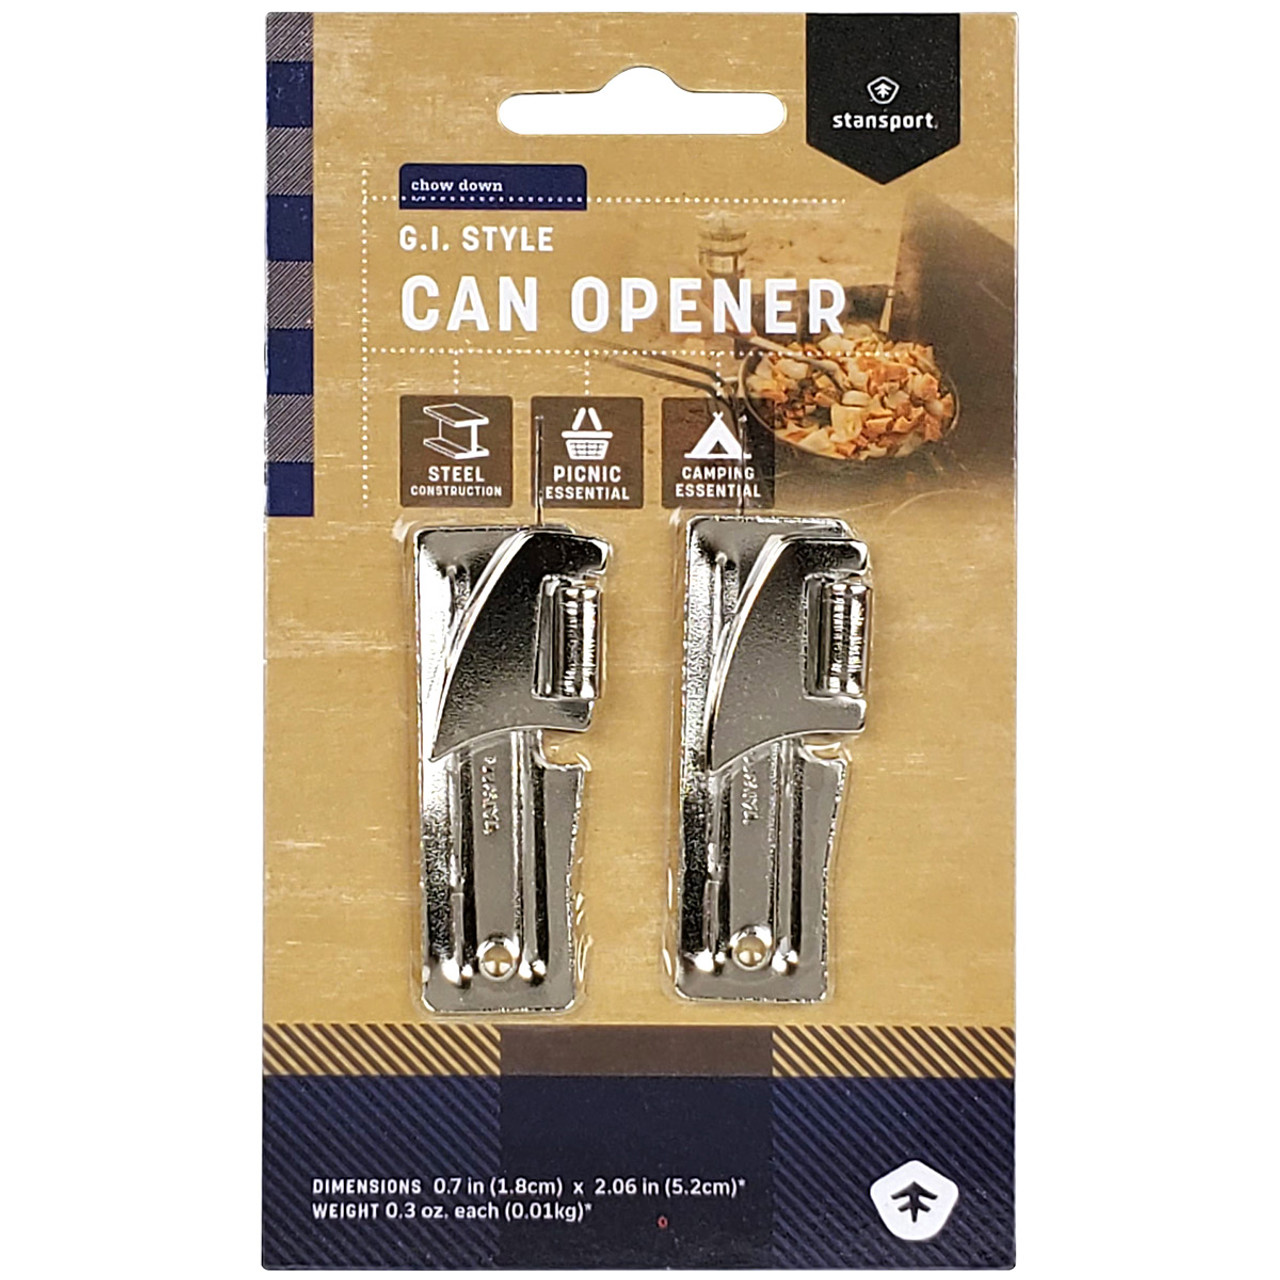 Camping Can Opener